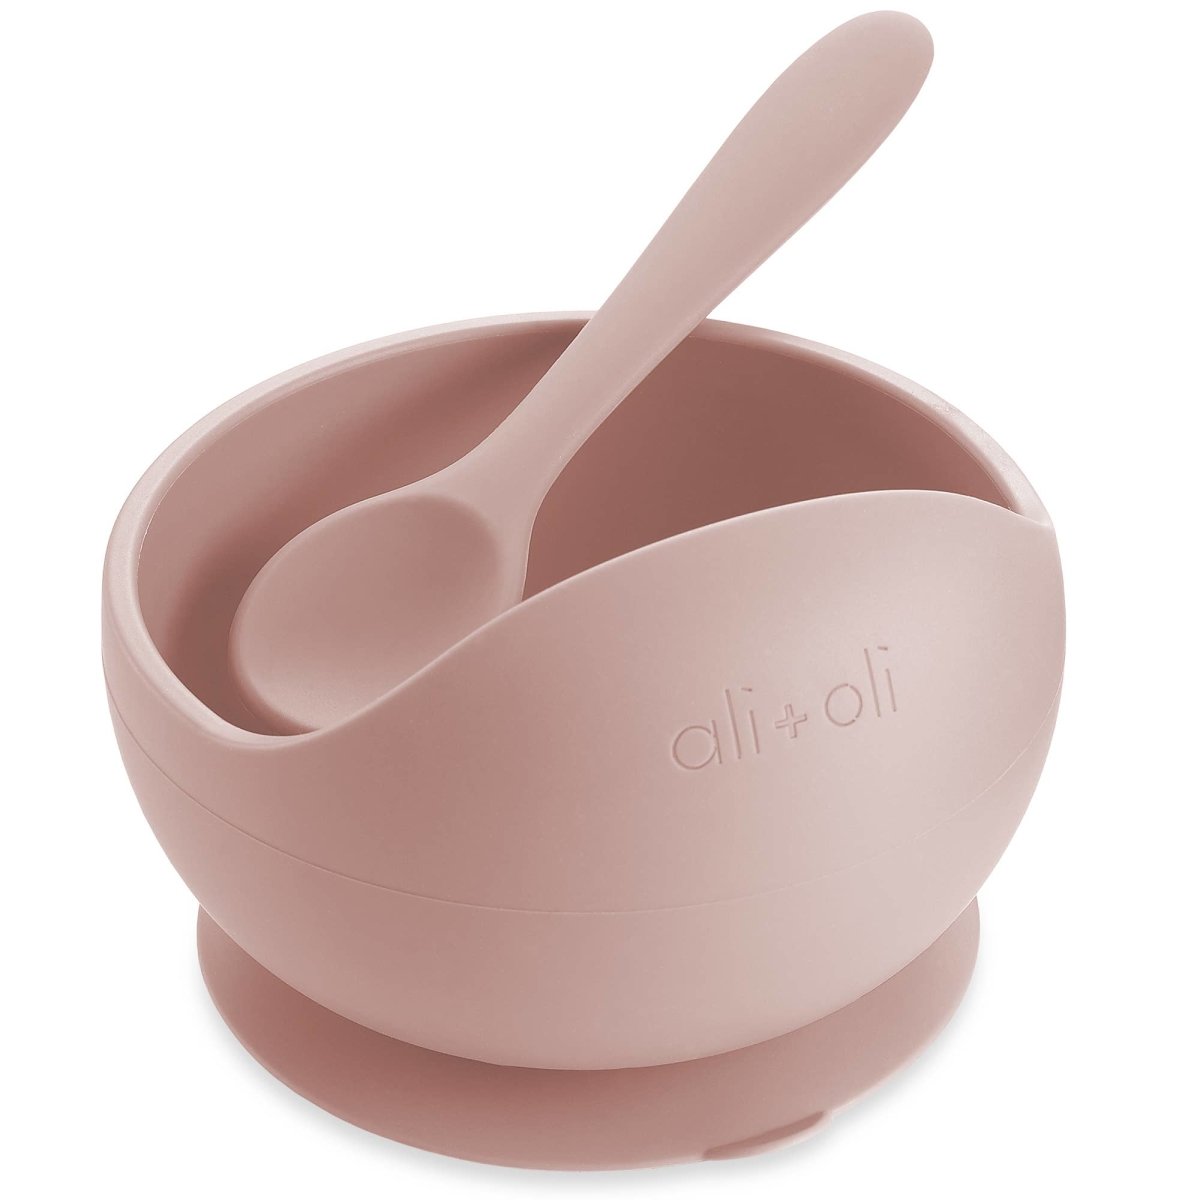 BABY SUCTION BOWL WITH LID AND SPOON COOL LIKE MICKEY - Storline